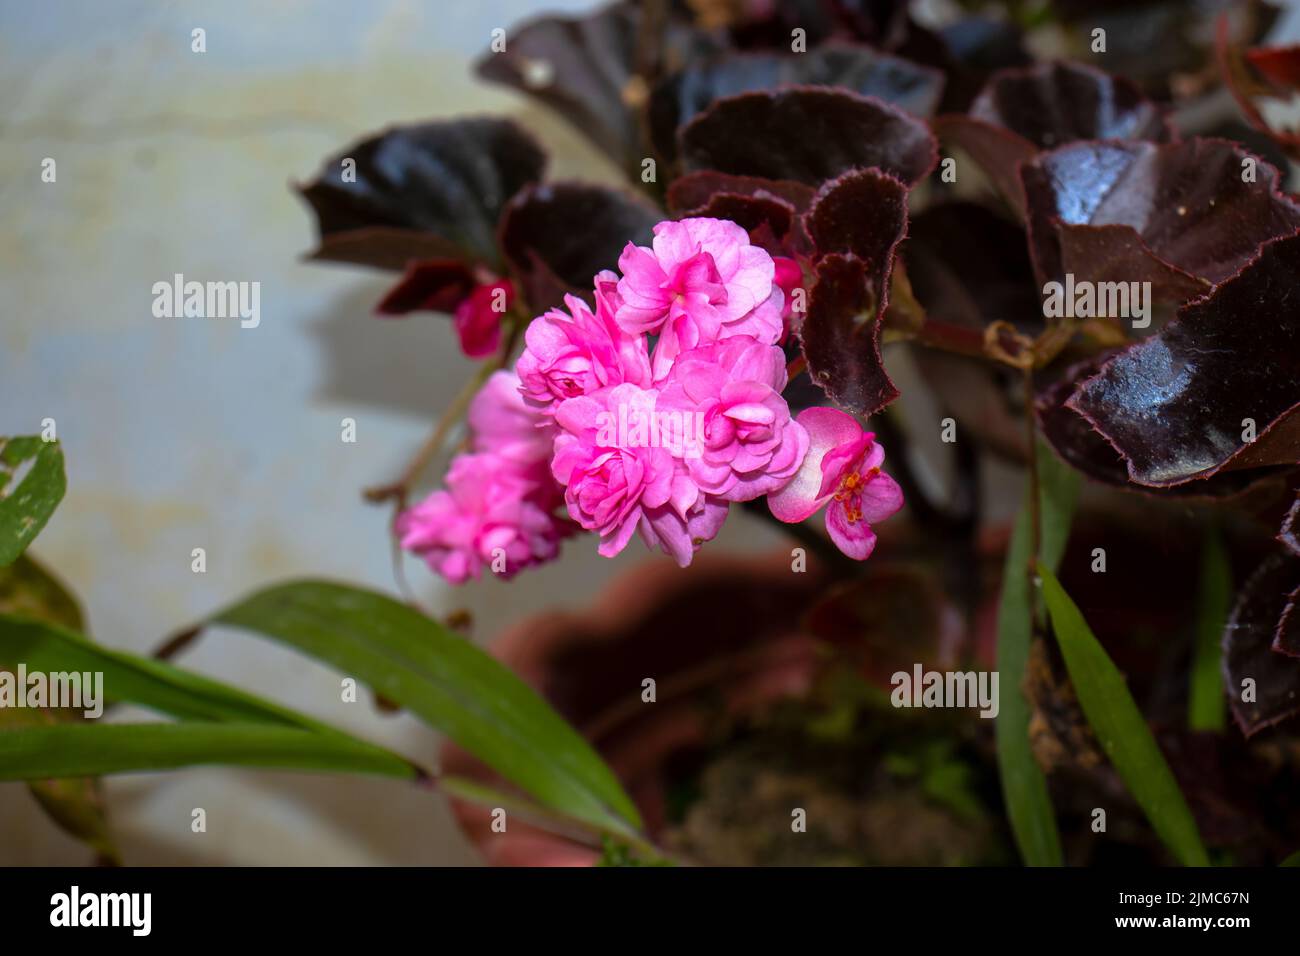 A closeup shot of a Begonia flower species with pink petals in flowerpot Stock Photo